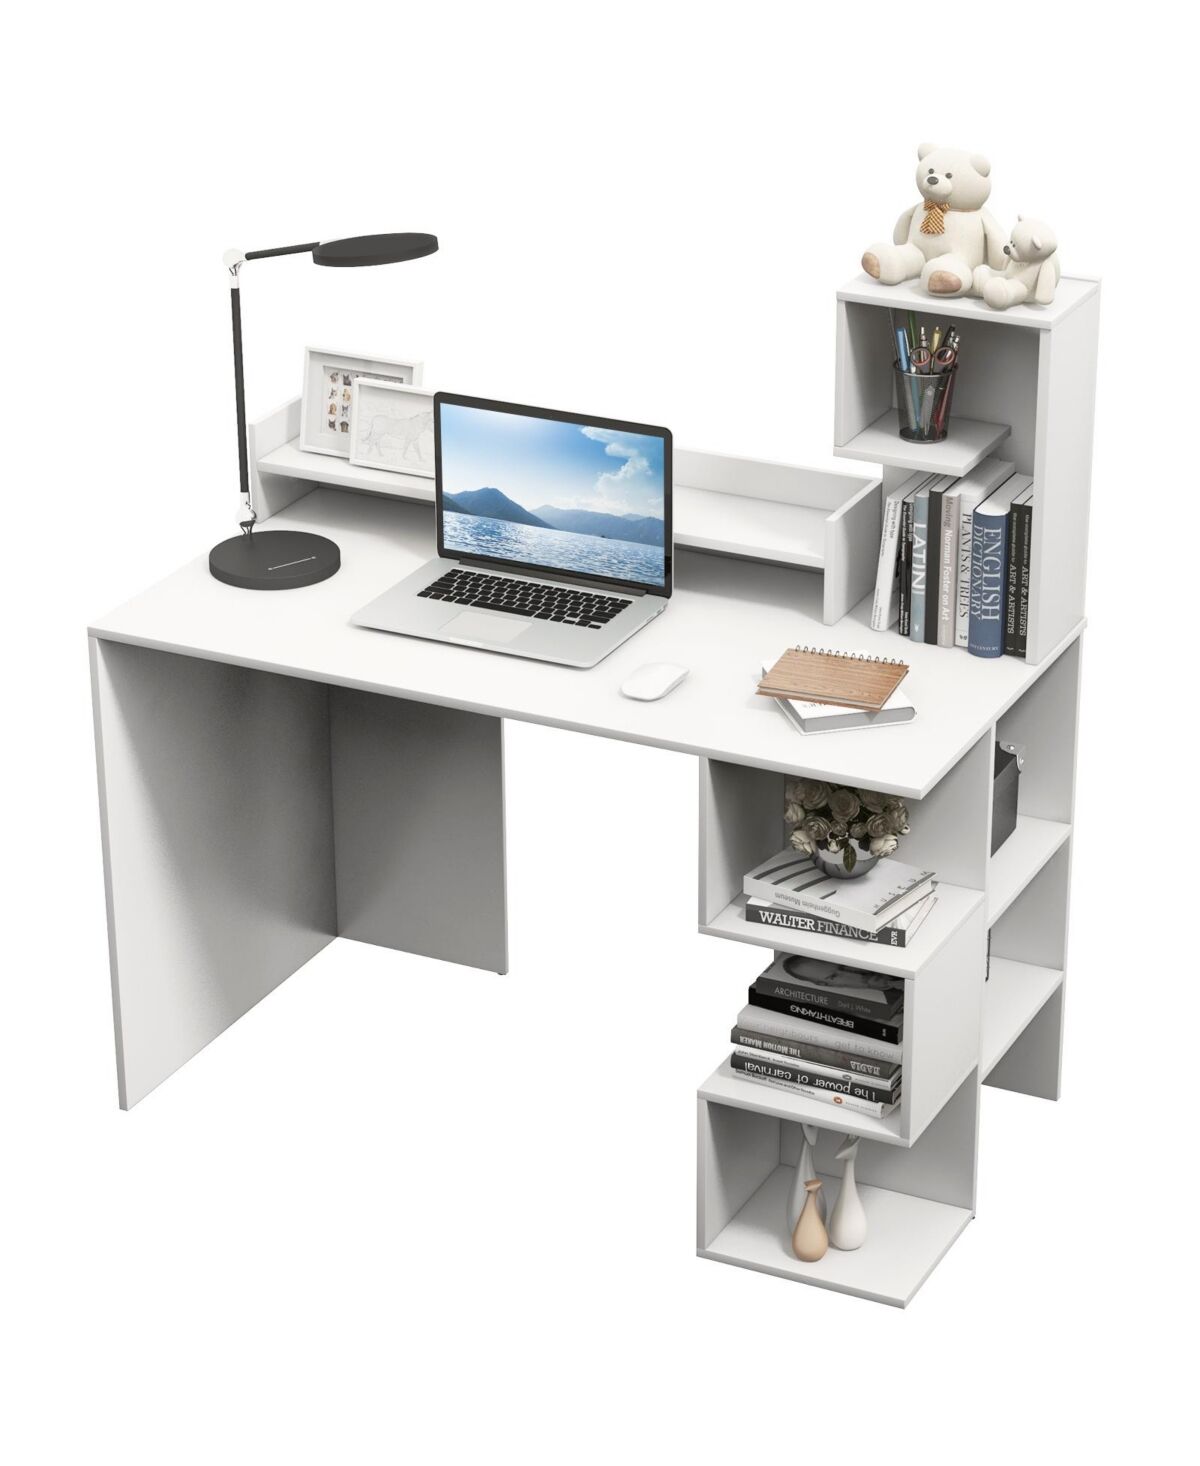 Slickblue Modern Computer Desk with Storage Bookshelf and Hutch for Home Office - White